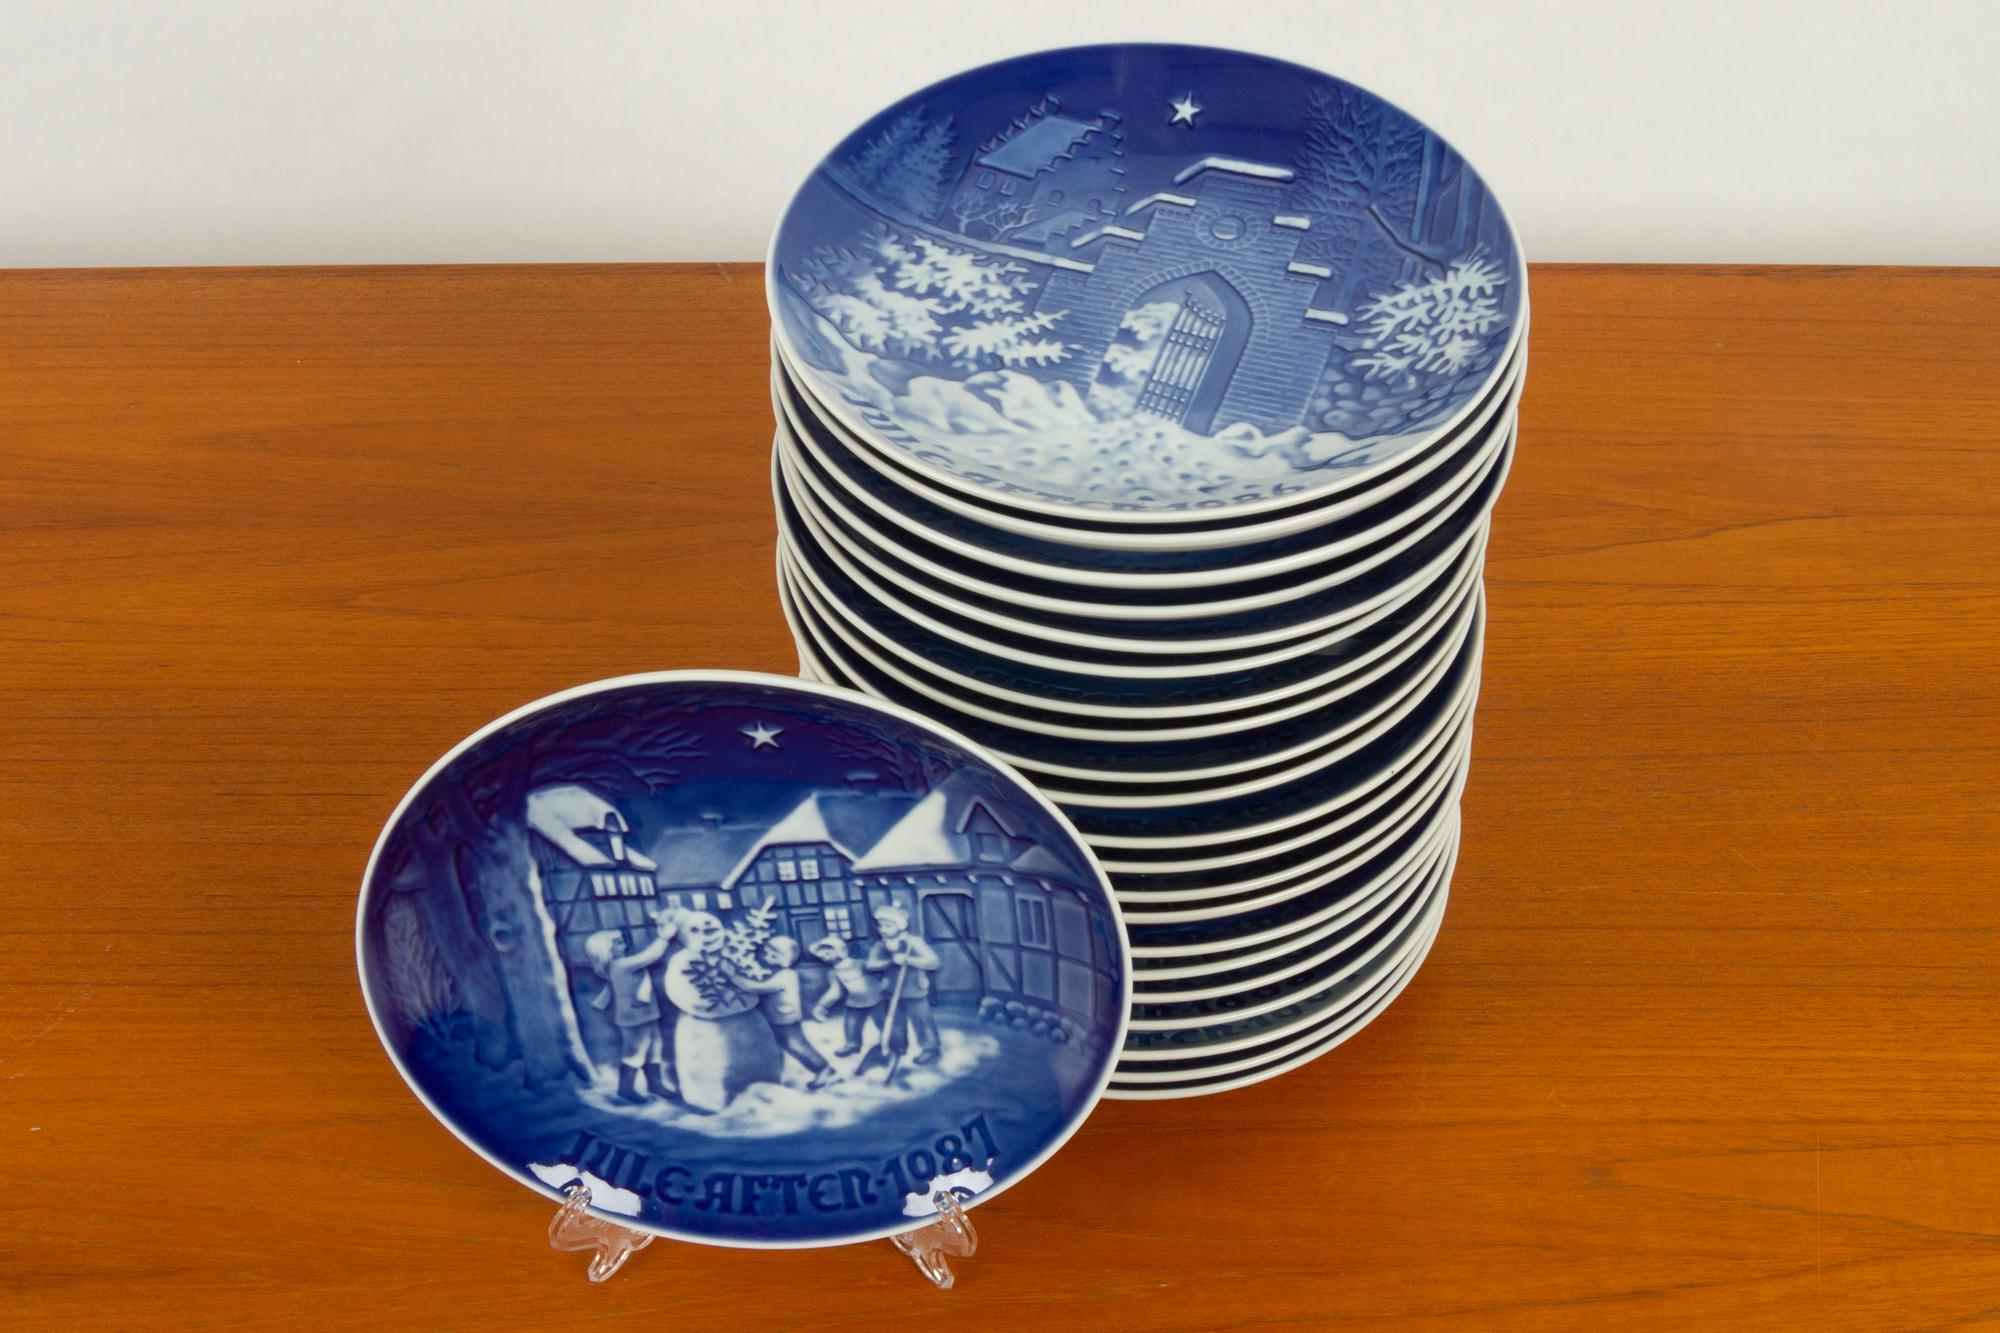 Vintage Danish Christmas platters, set of 23
23 hand painted porcelain plates from Bing & Grøndahl in Denmark.
This sets is from 1965-1987. Each year is in this set.
Can hang on the wall or be used as a dish. Dishwasher safe.
Very good